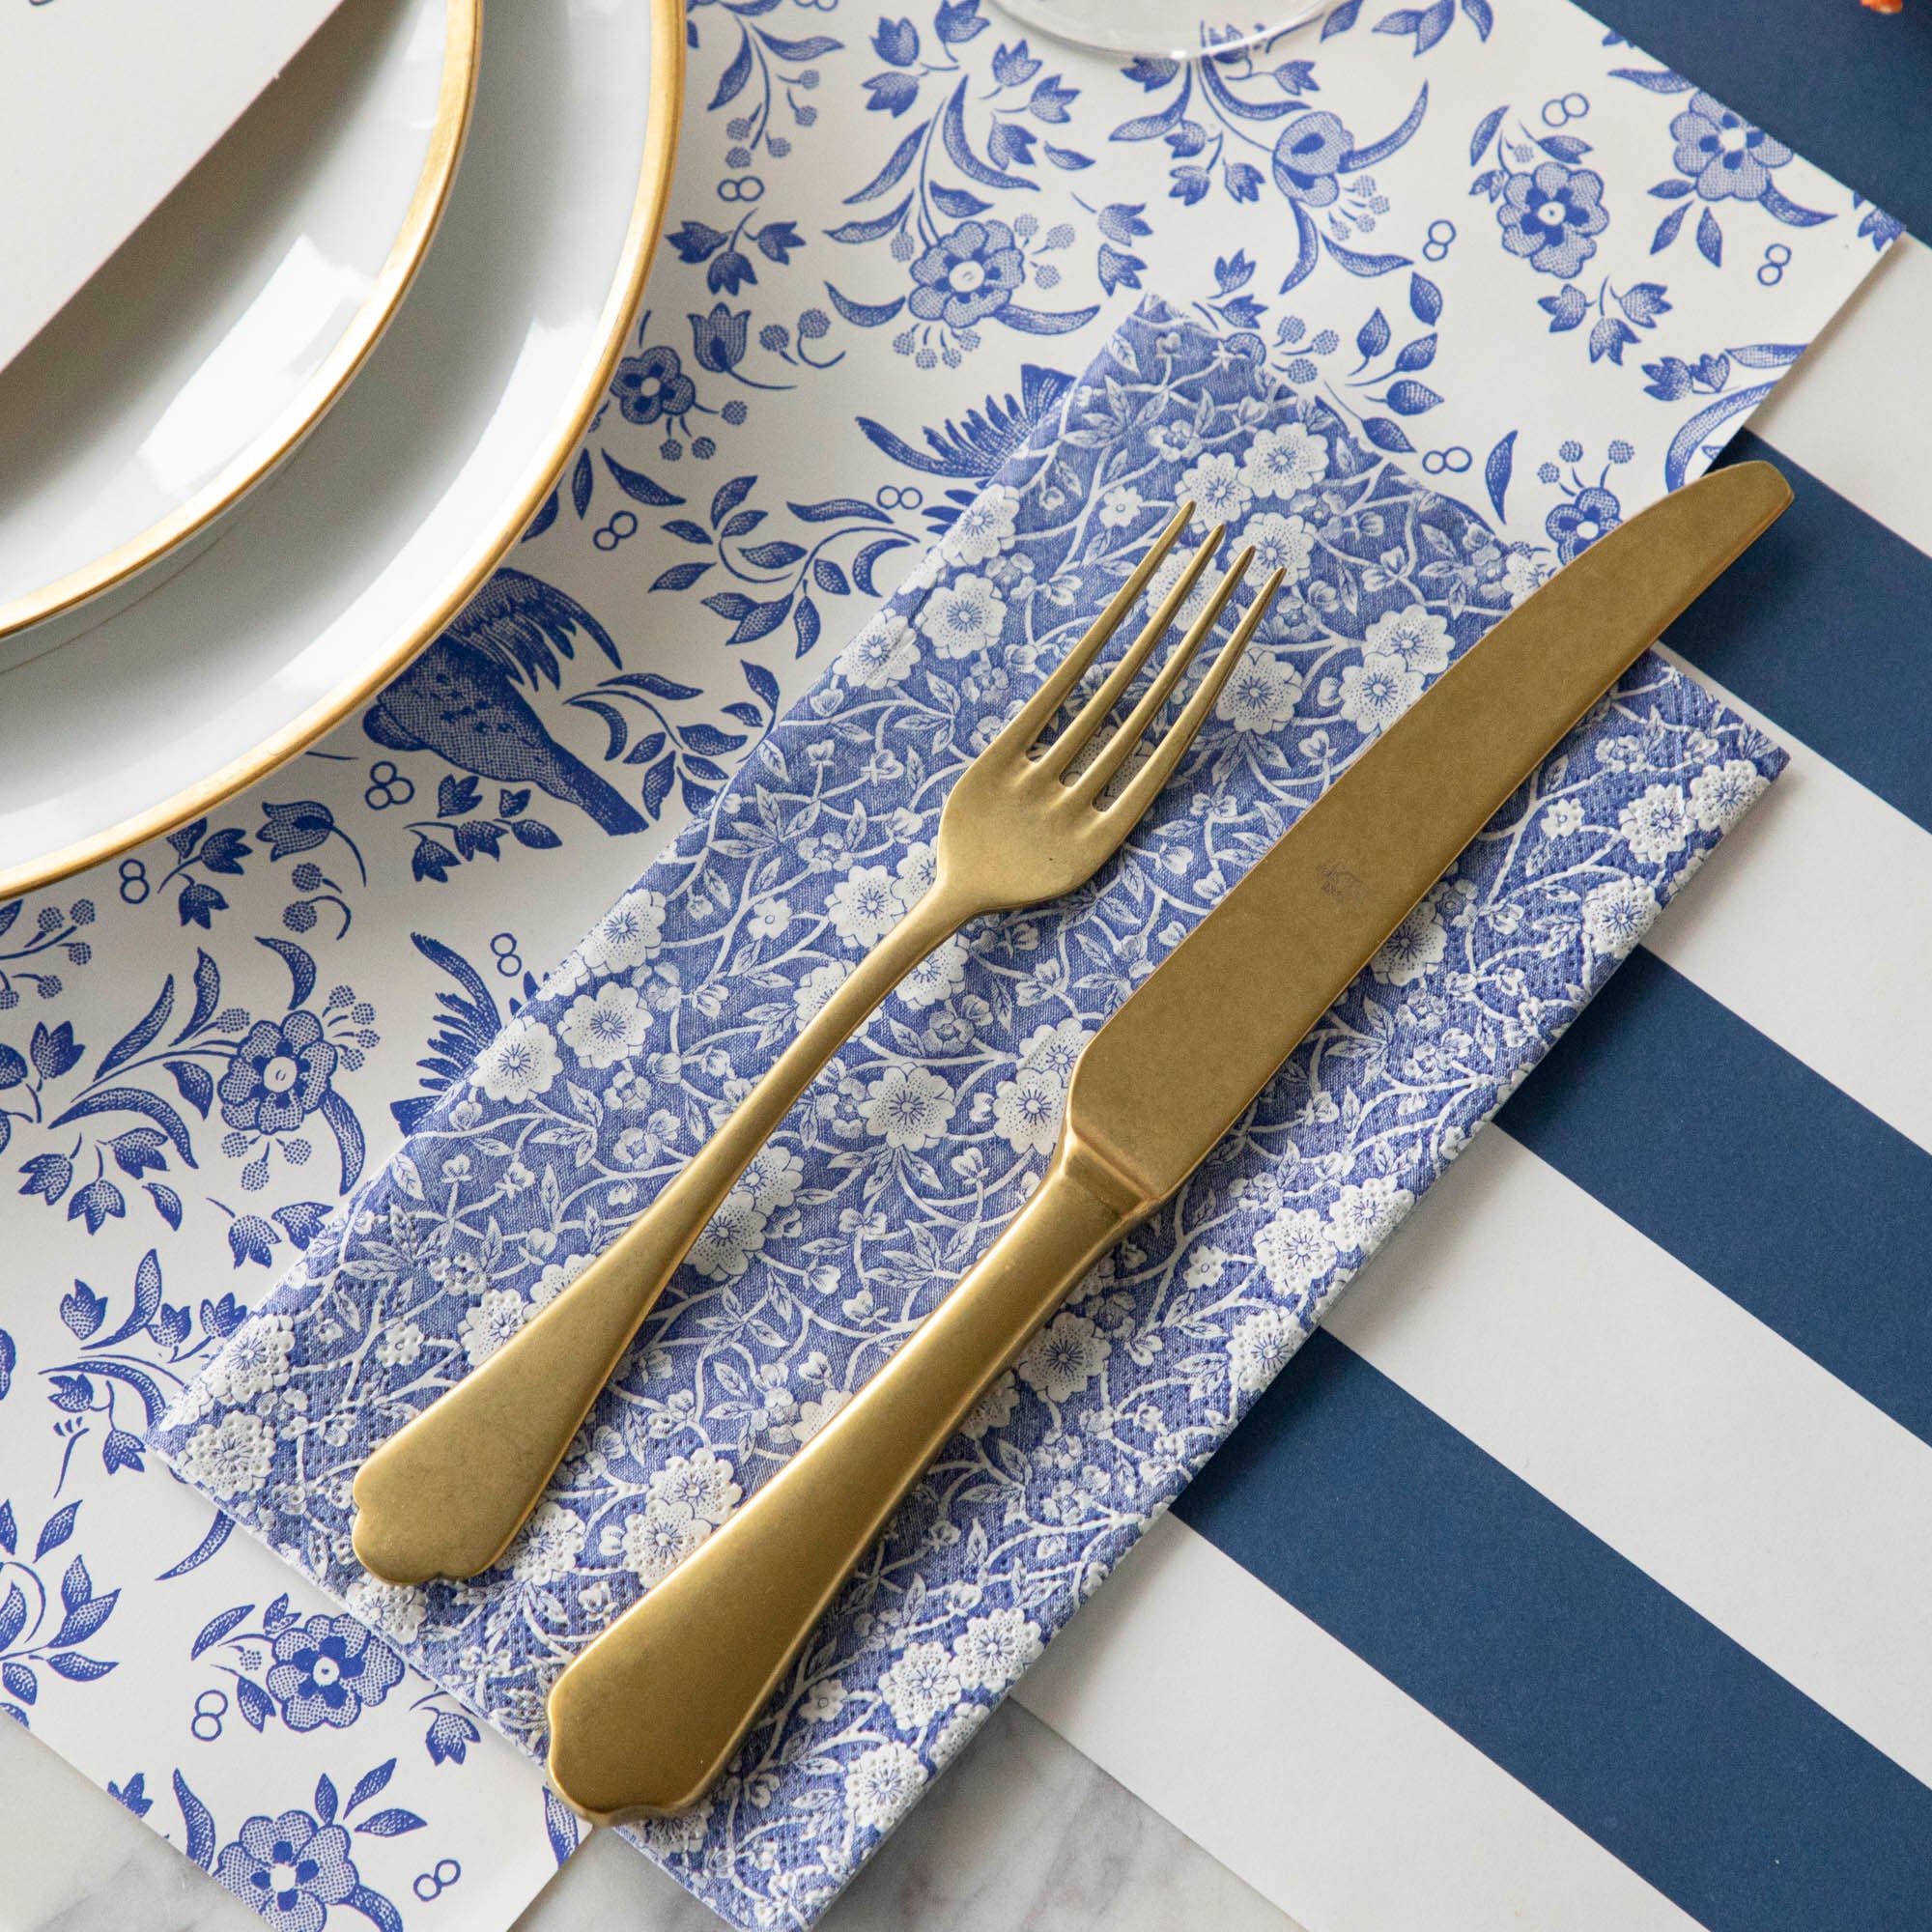 A Blue Calico Napkins place setting, exquisitely decorated with a fork and knife from Hester &amp; Cook.